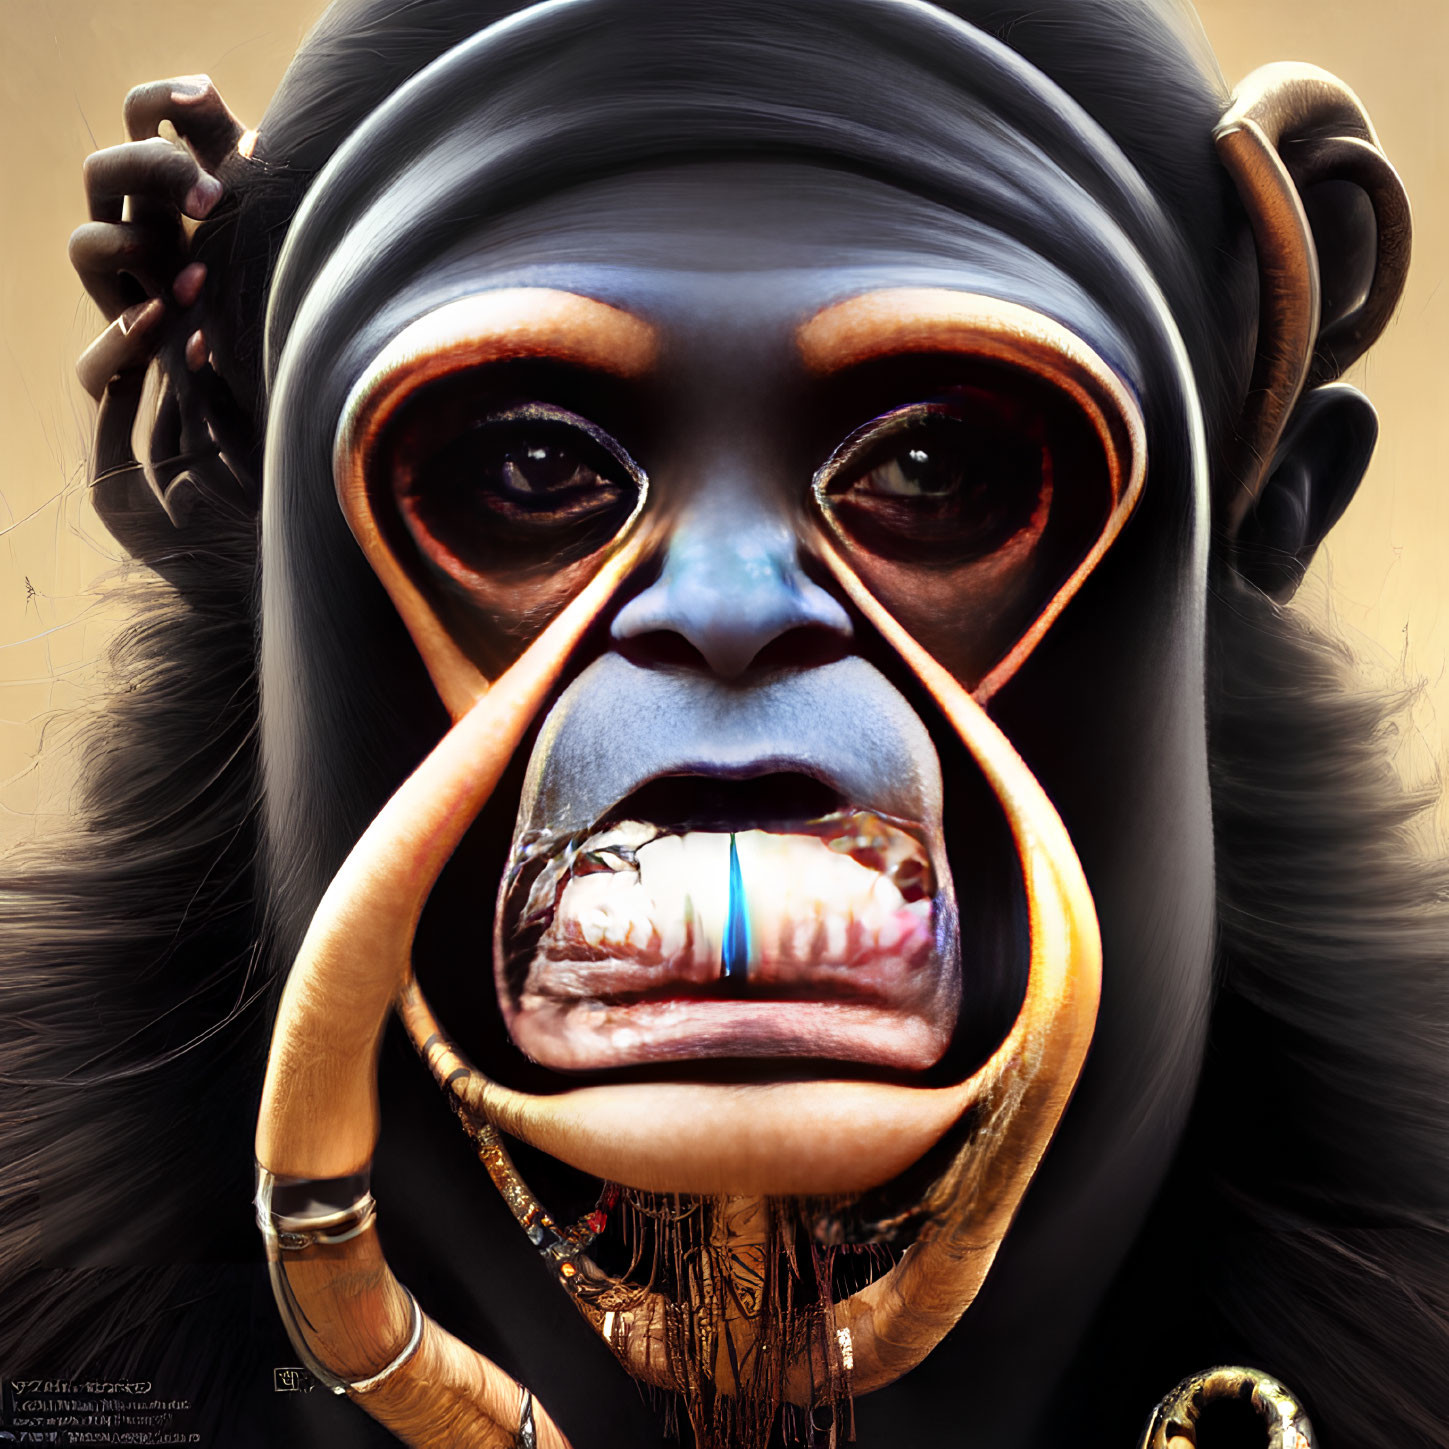 Digitally created primate with human-like eyes in earrings and necklace on brown background